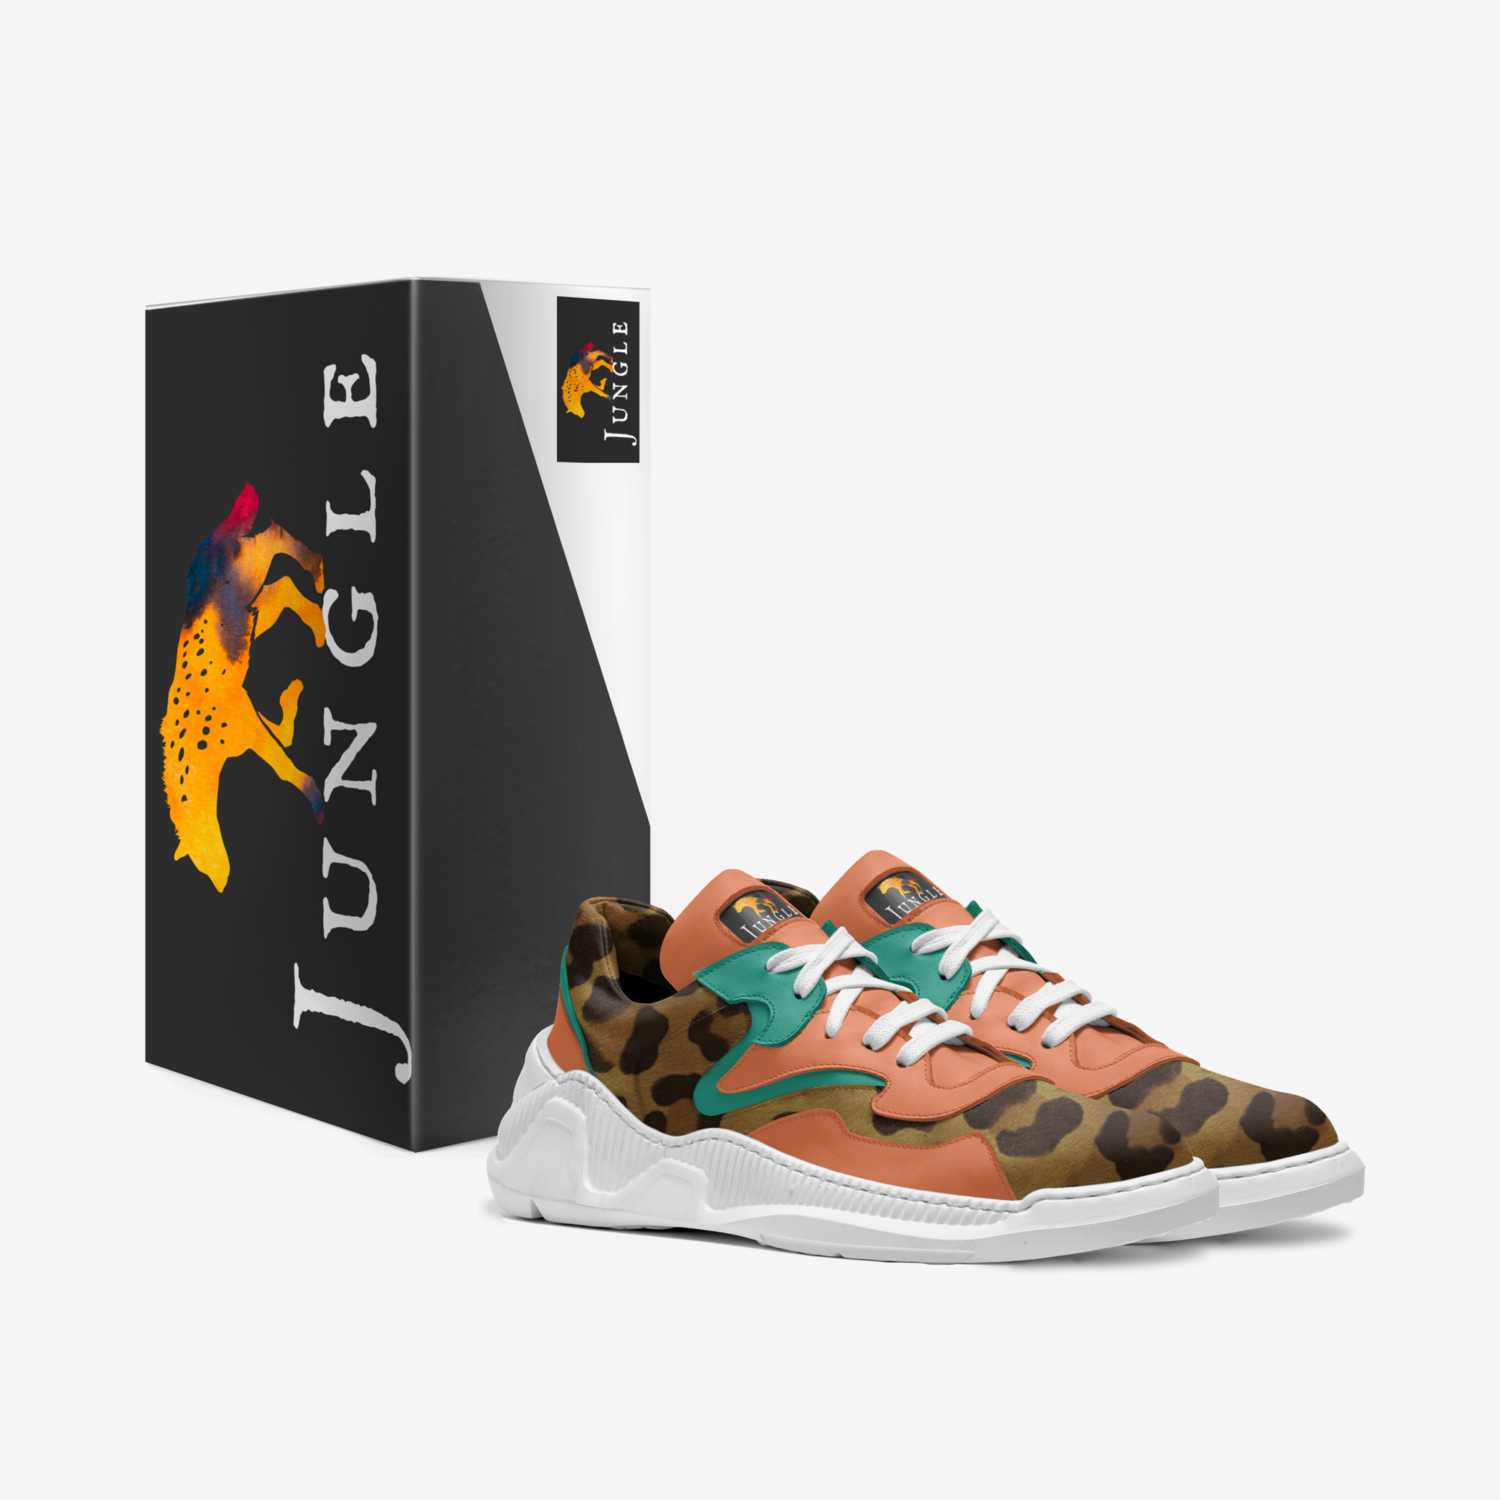 Jungle Fever custom made in Italy shoes by Leagueofmyown | Box view